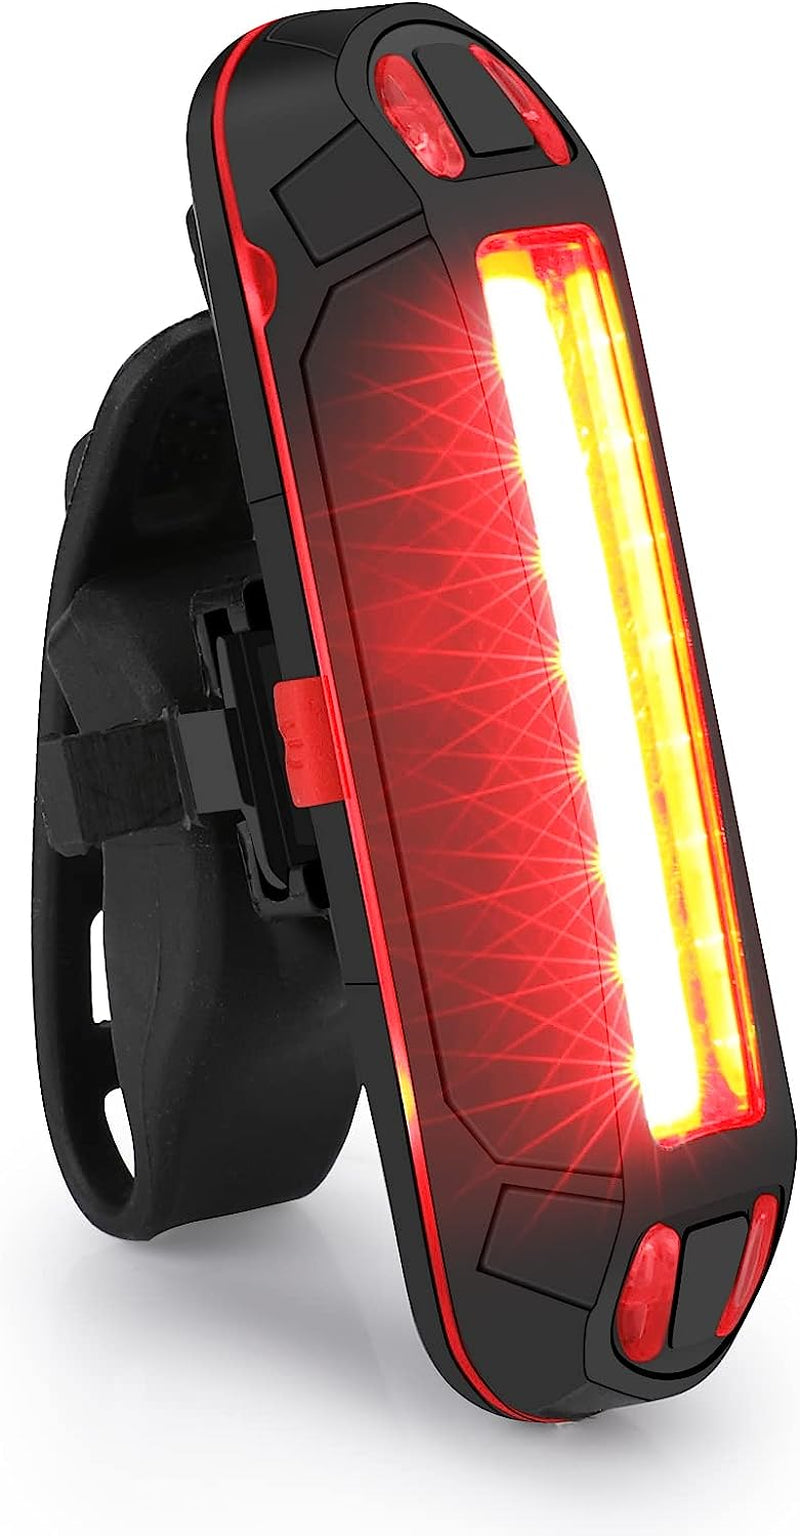 Bike Tail Light,Rechargeable LED Bike Rear Lights, Waterproof Shockproof Bike Back Light for Night Riding, Cycling Flashlight Safety Reflectors Accessories,Fits Adult, Kids MTB